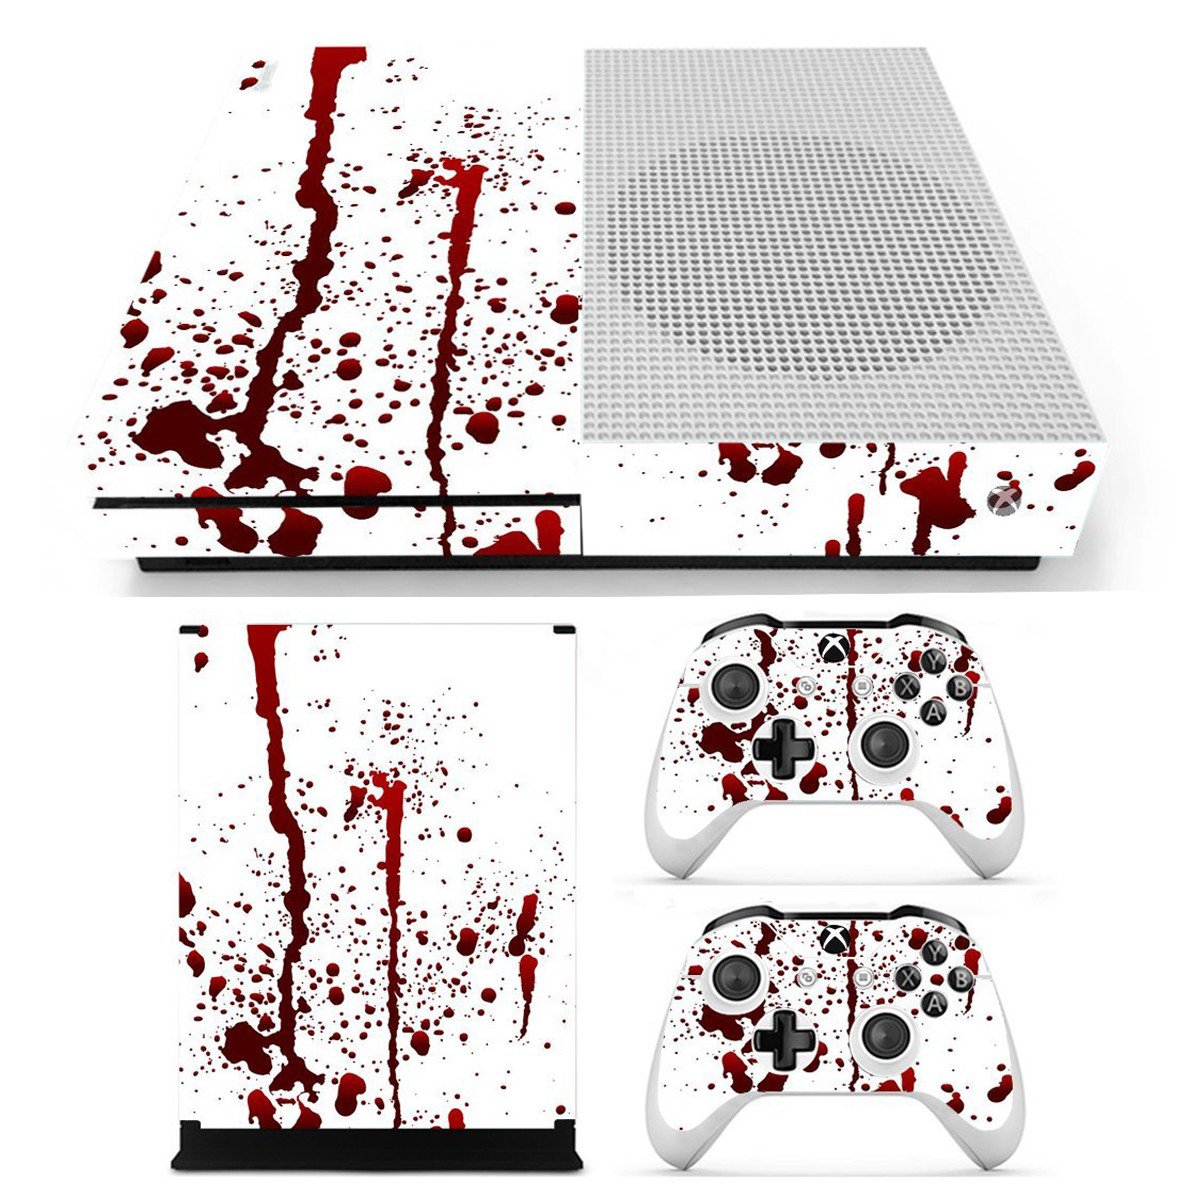 Bloody Skin Decals Stickers Cover for Xbox One S Game Console & 2 Controllers 1